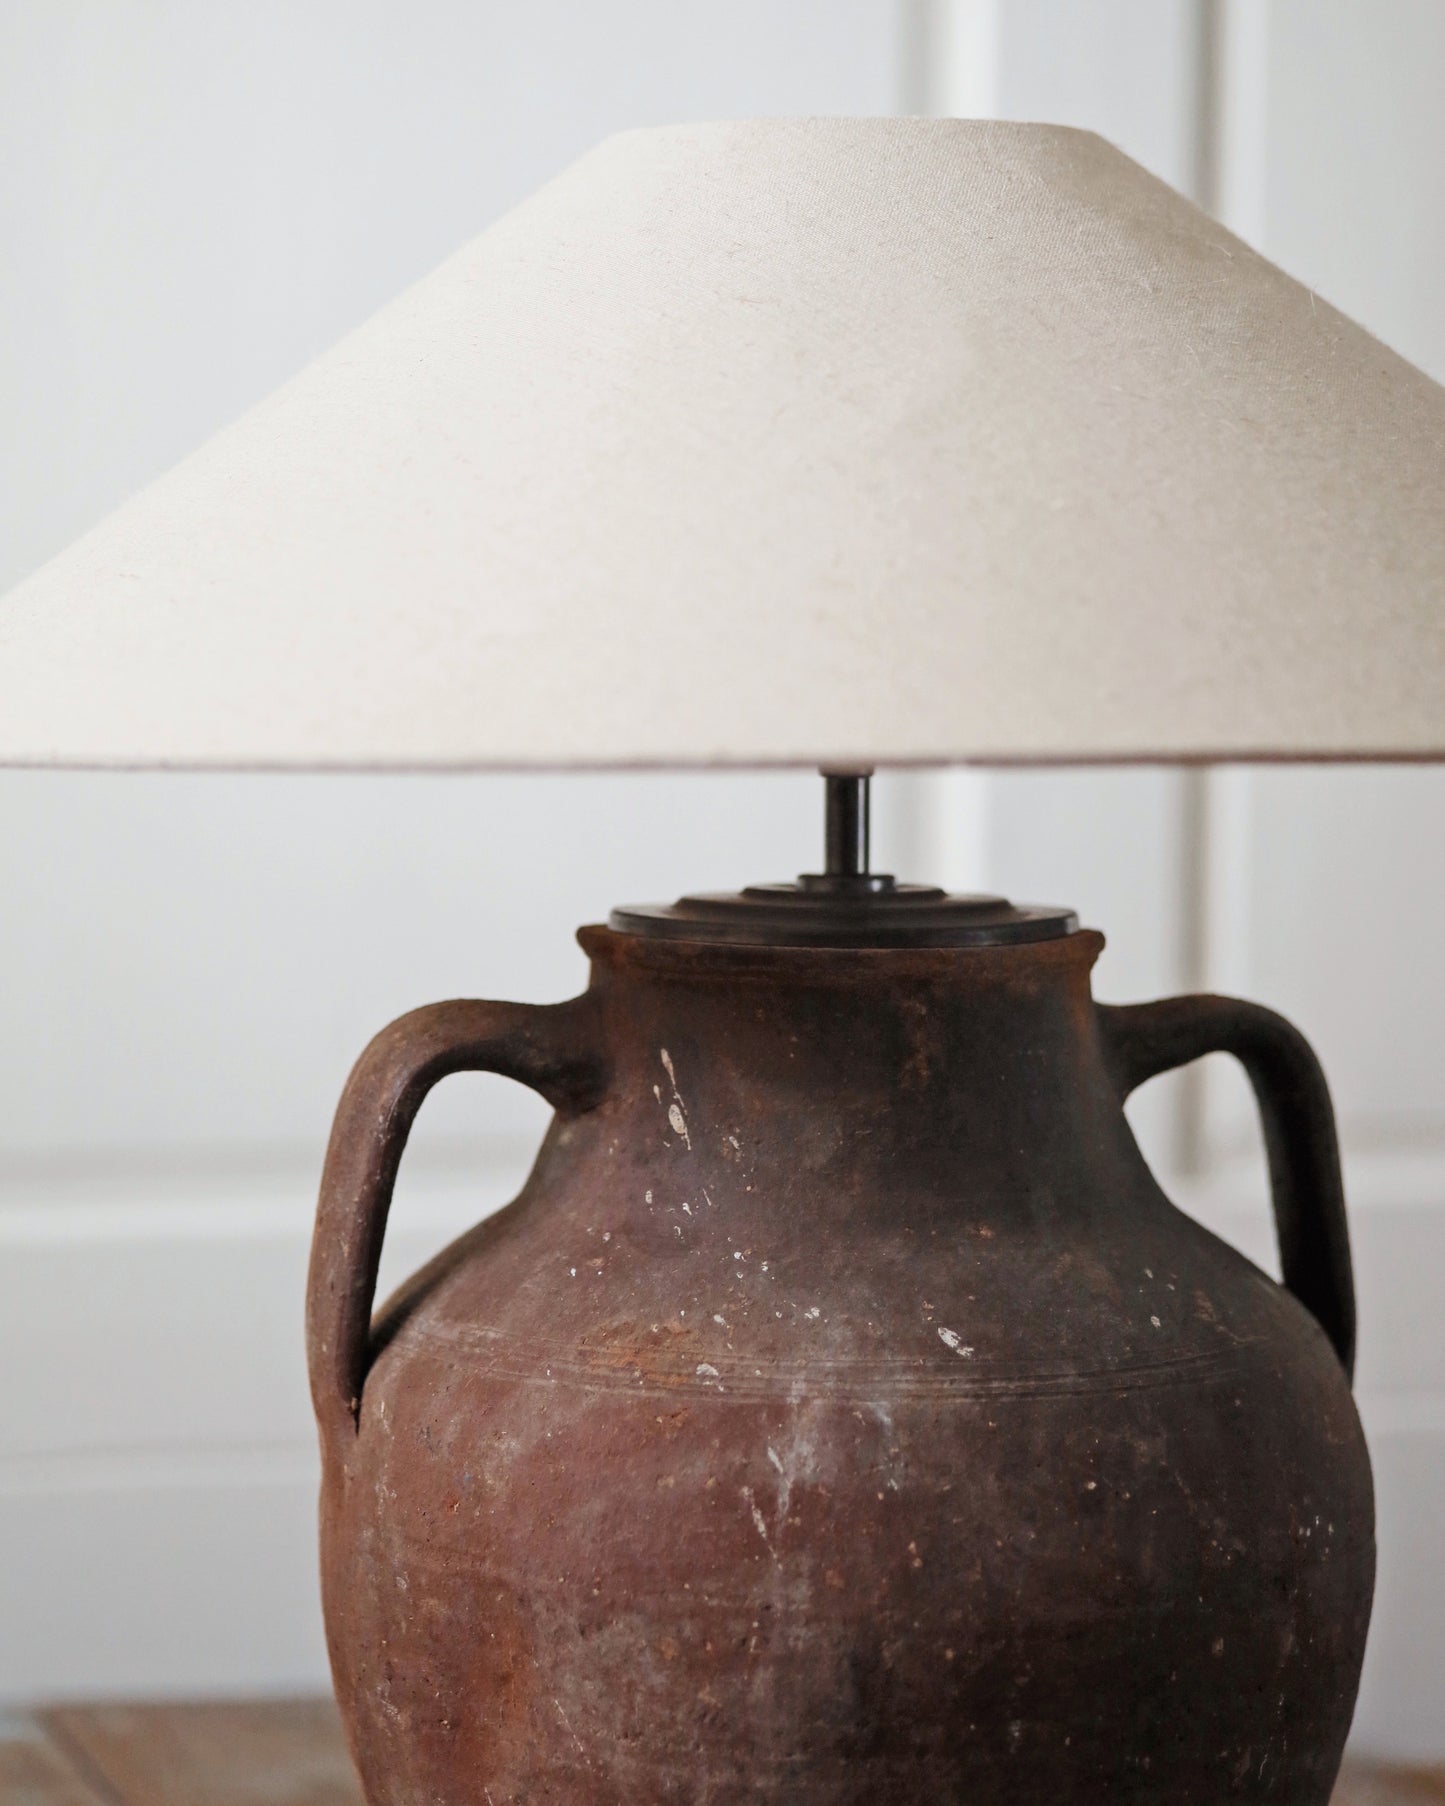 Antique clay table lamp with brass fittings